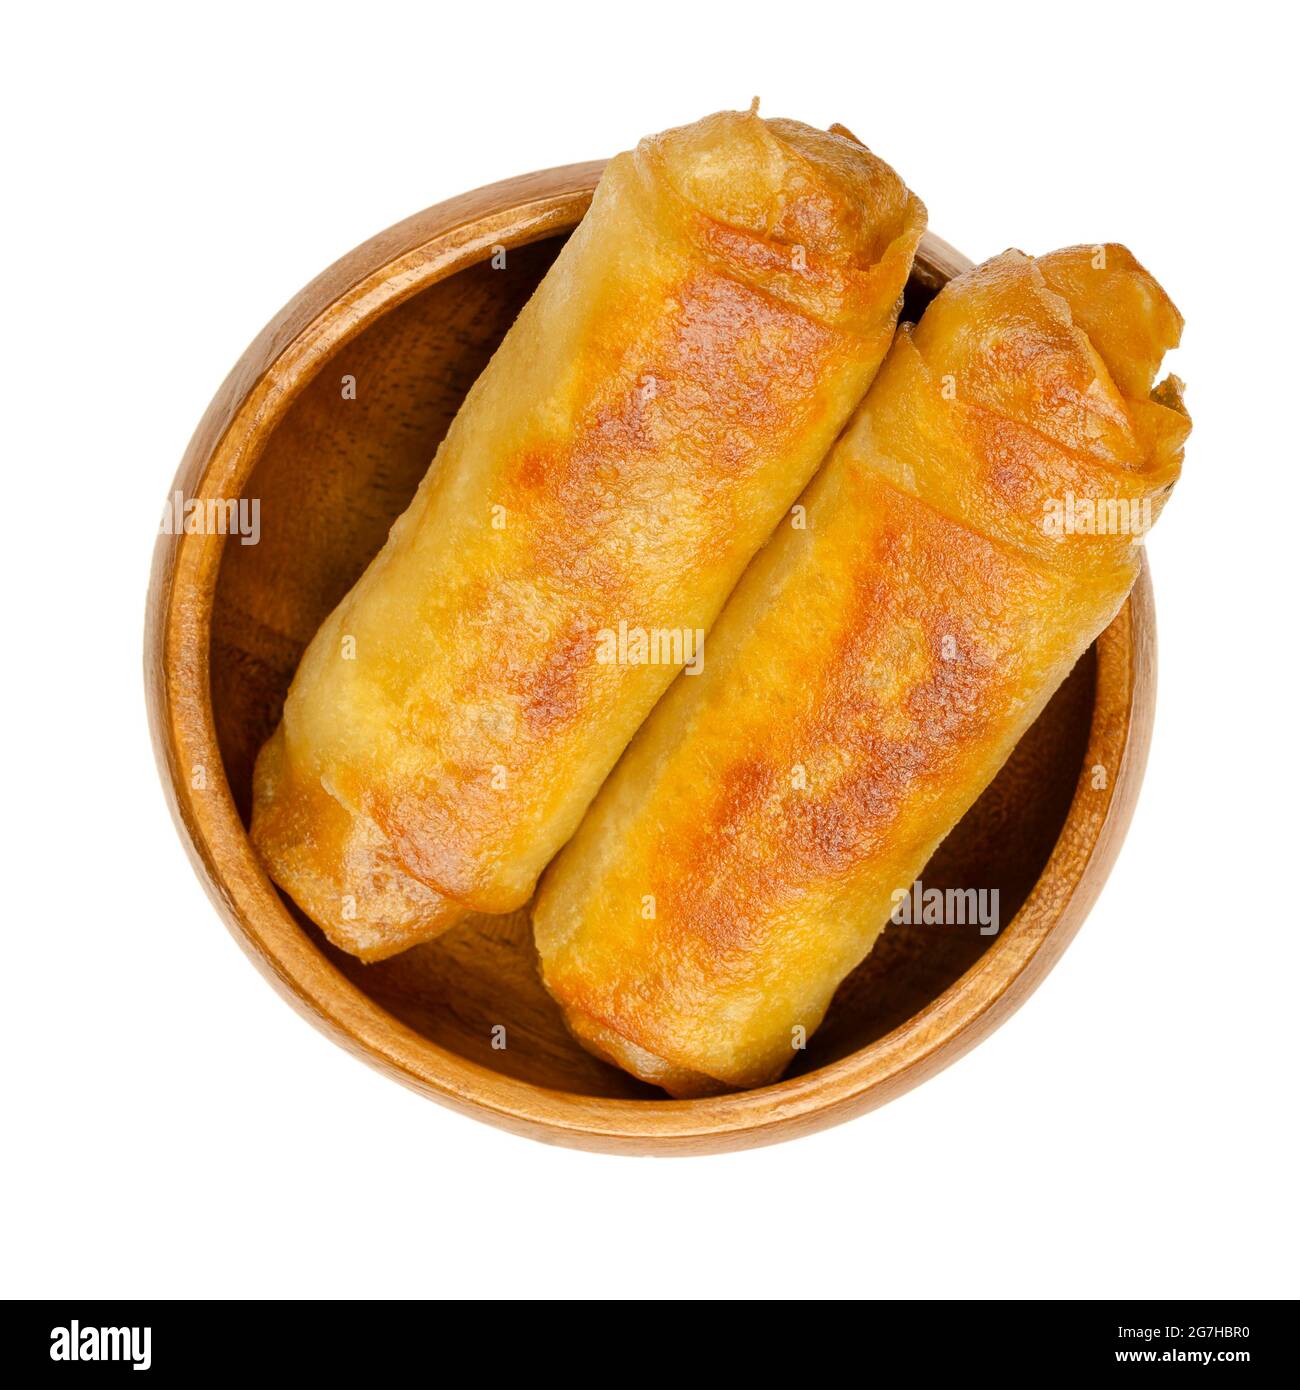 Fried spring rolls, in a wooden bowl. Two spring rolls, crispy fried in a pan. Filled and rolled wrappers, appetizers in Asian cuisine. Stock Photo